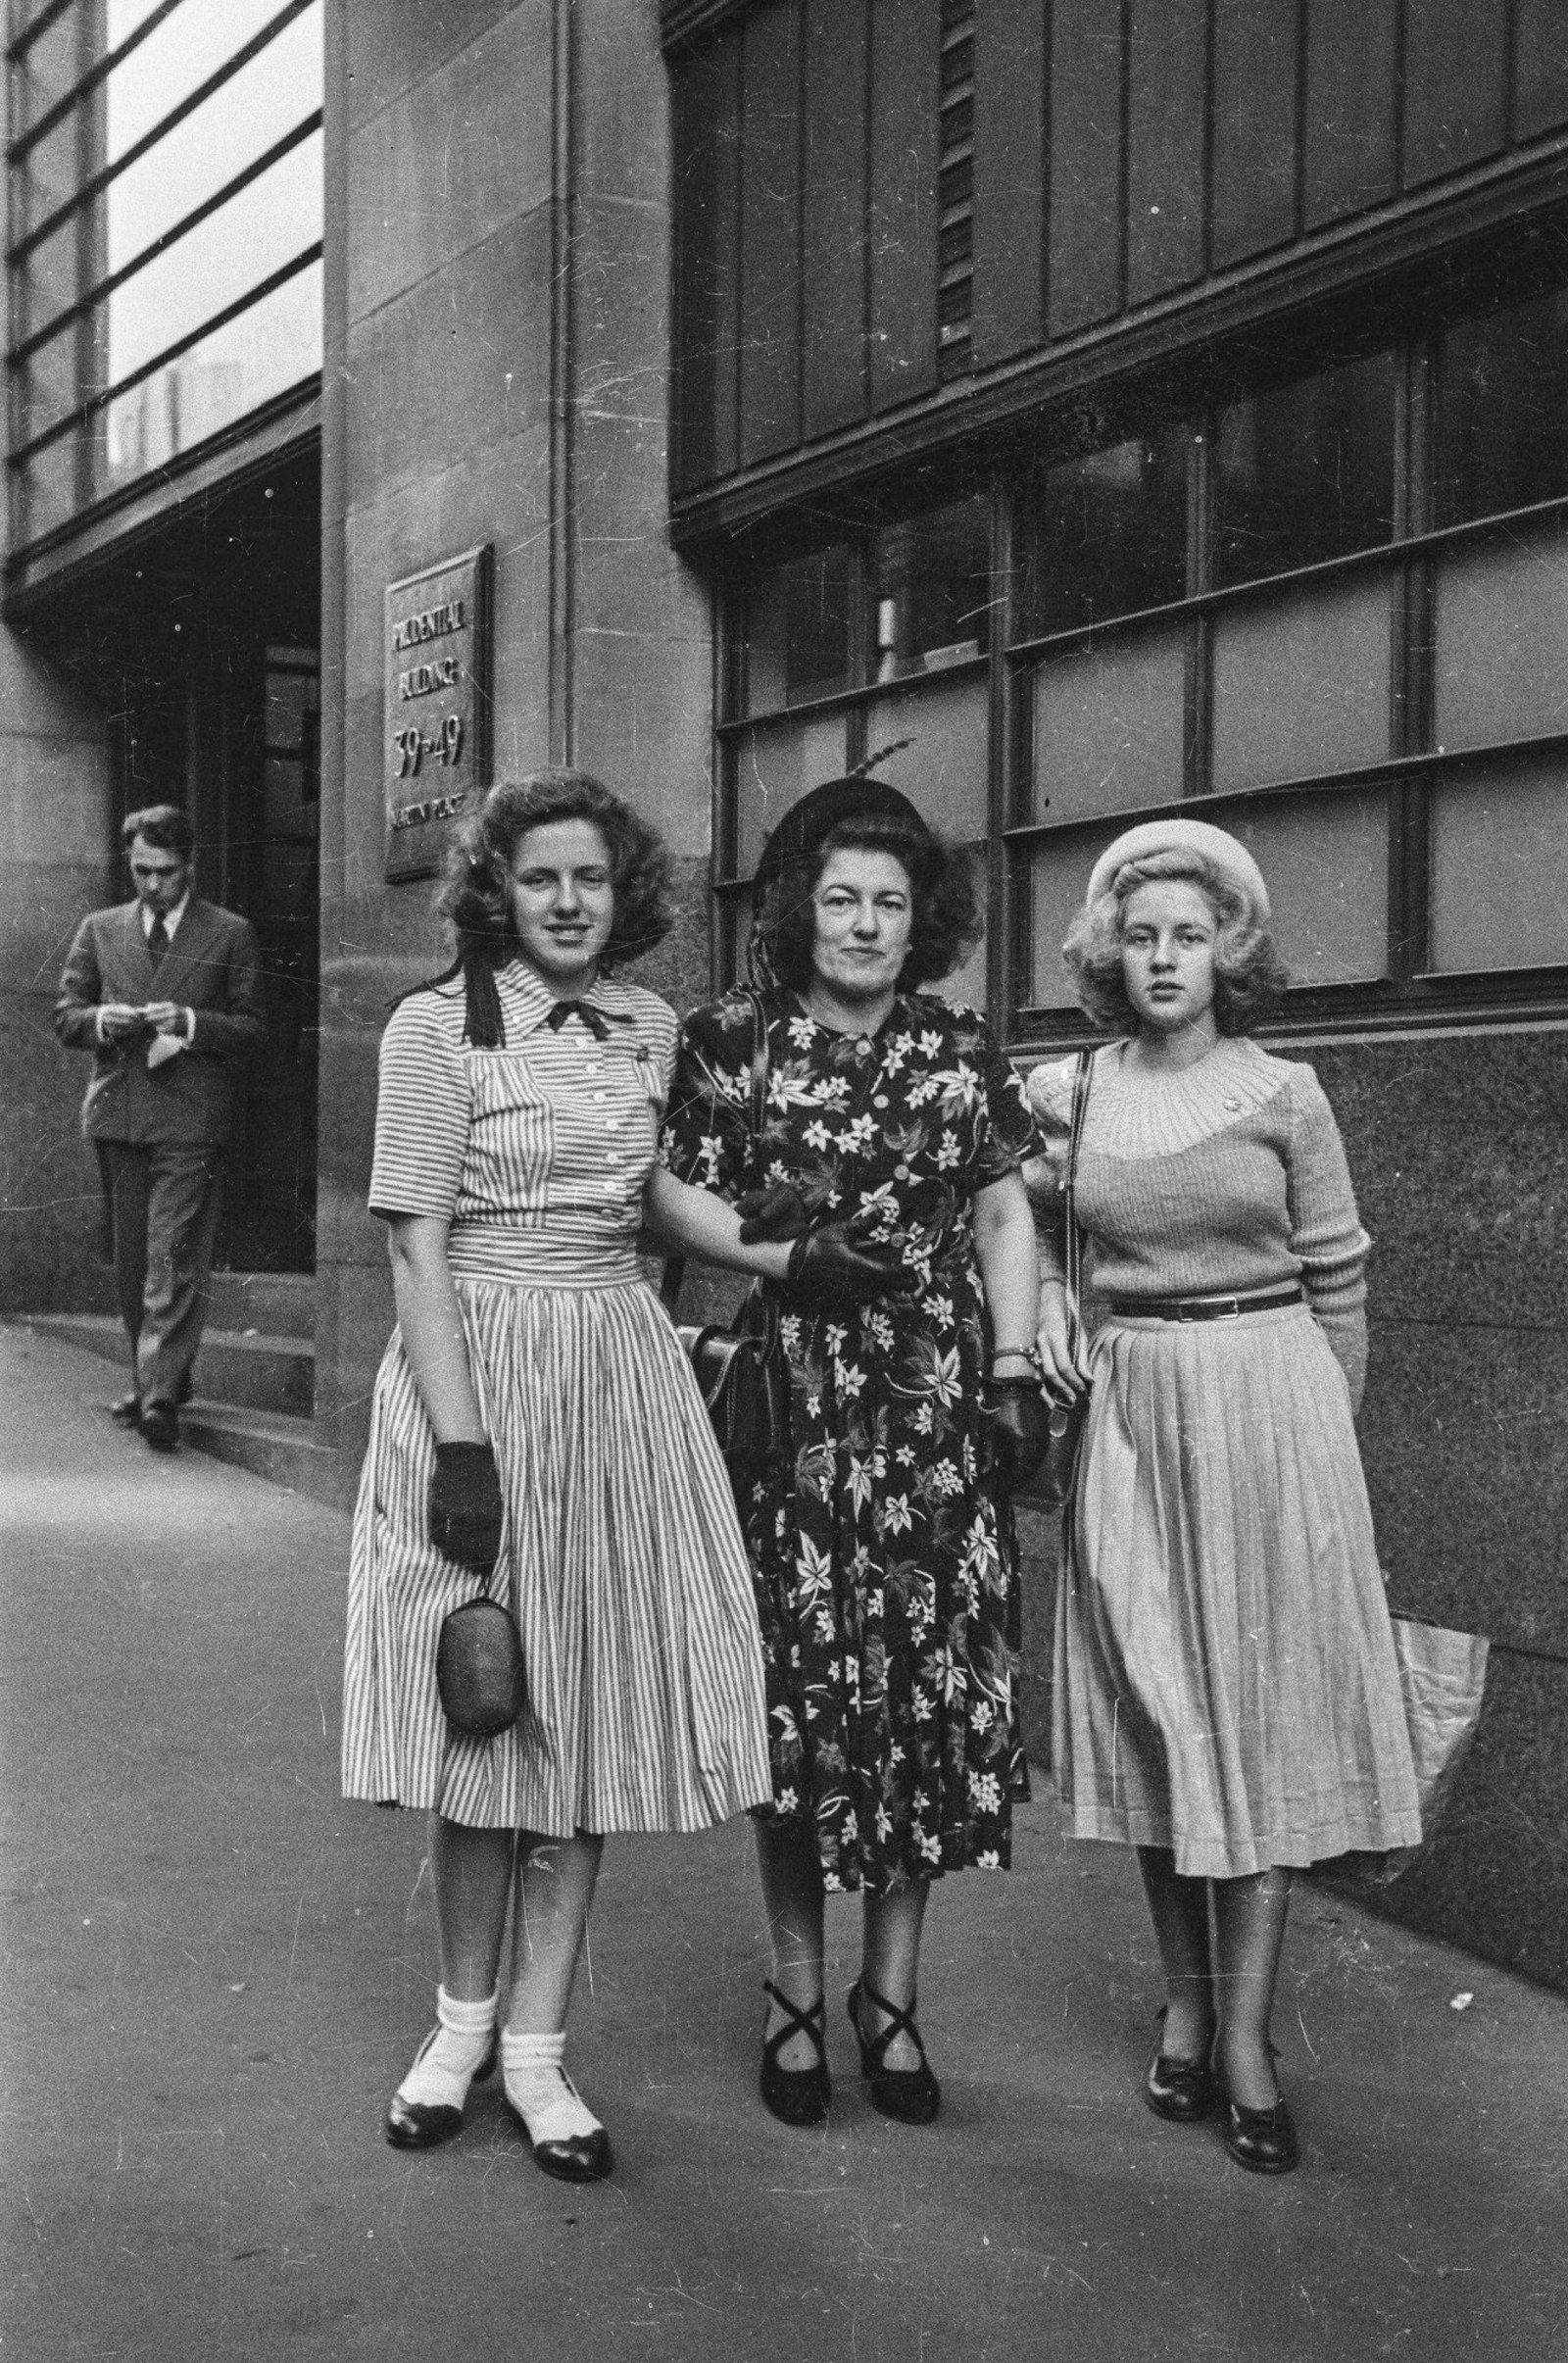 Black and white street photograph of three women linking arms standing in the street.